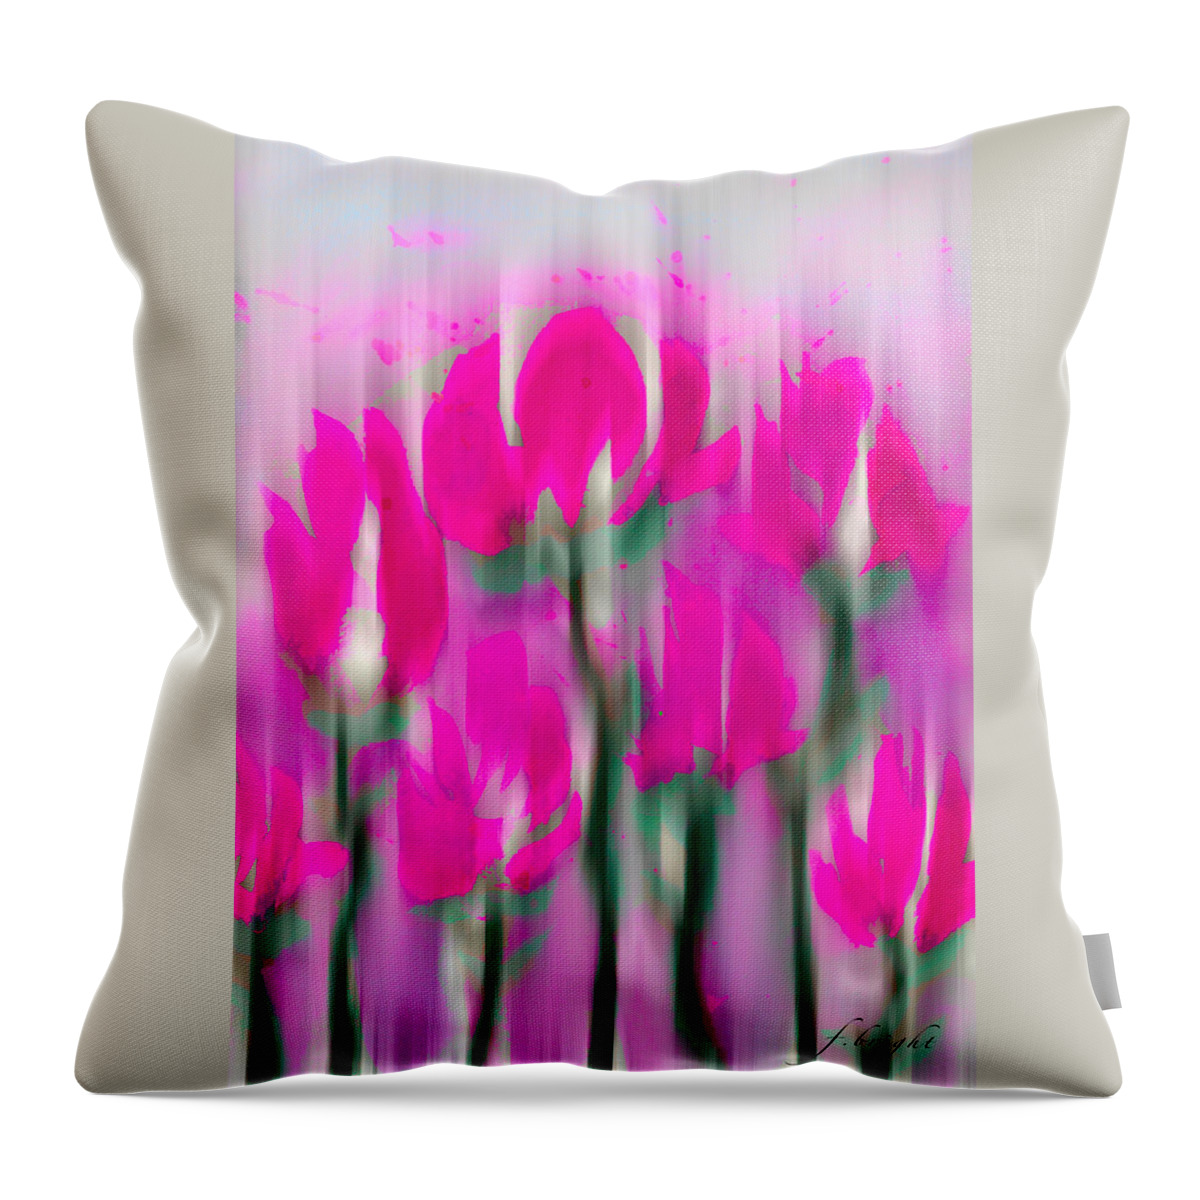 Rose Throw Pillow featuring the digital art 6 1/2 Flowers by Frank Bright